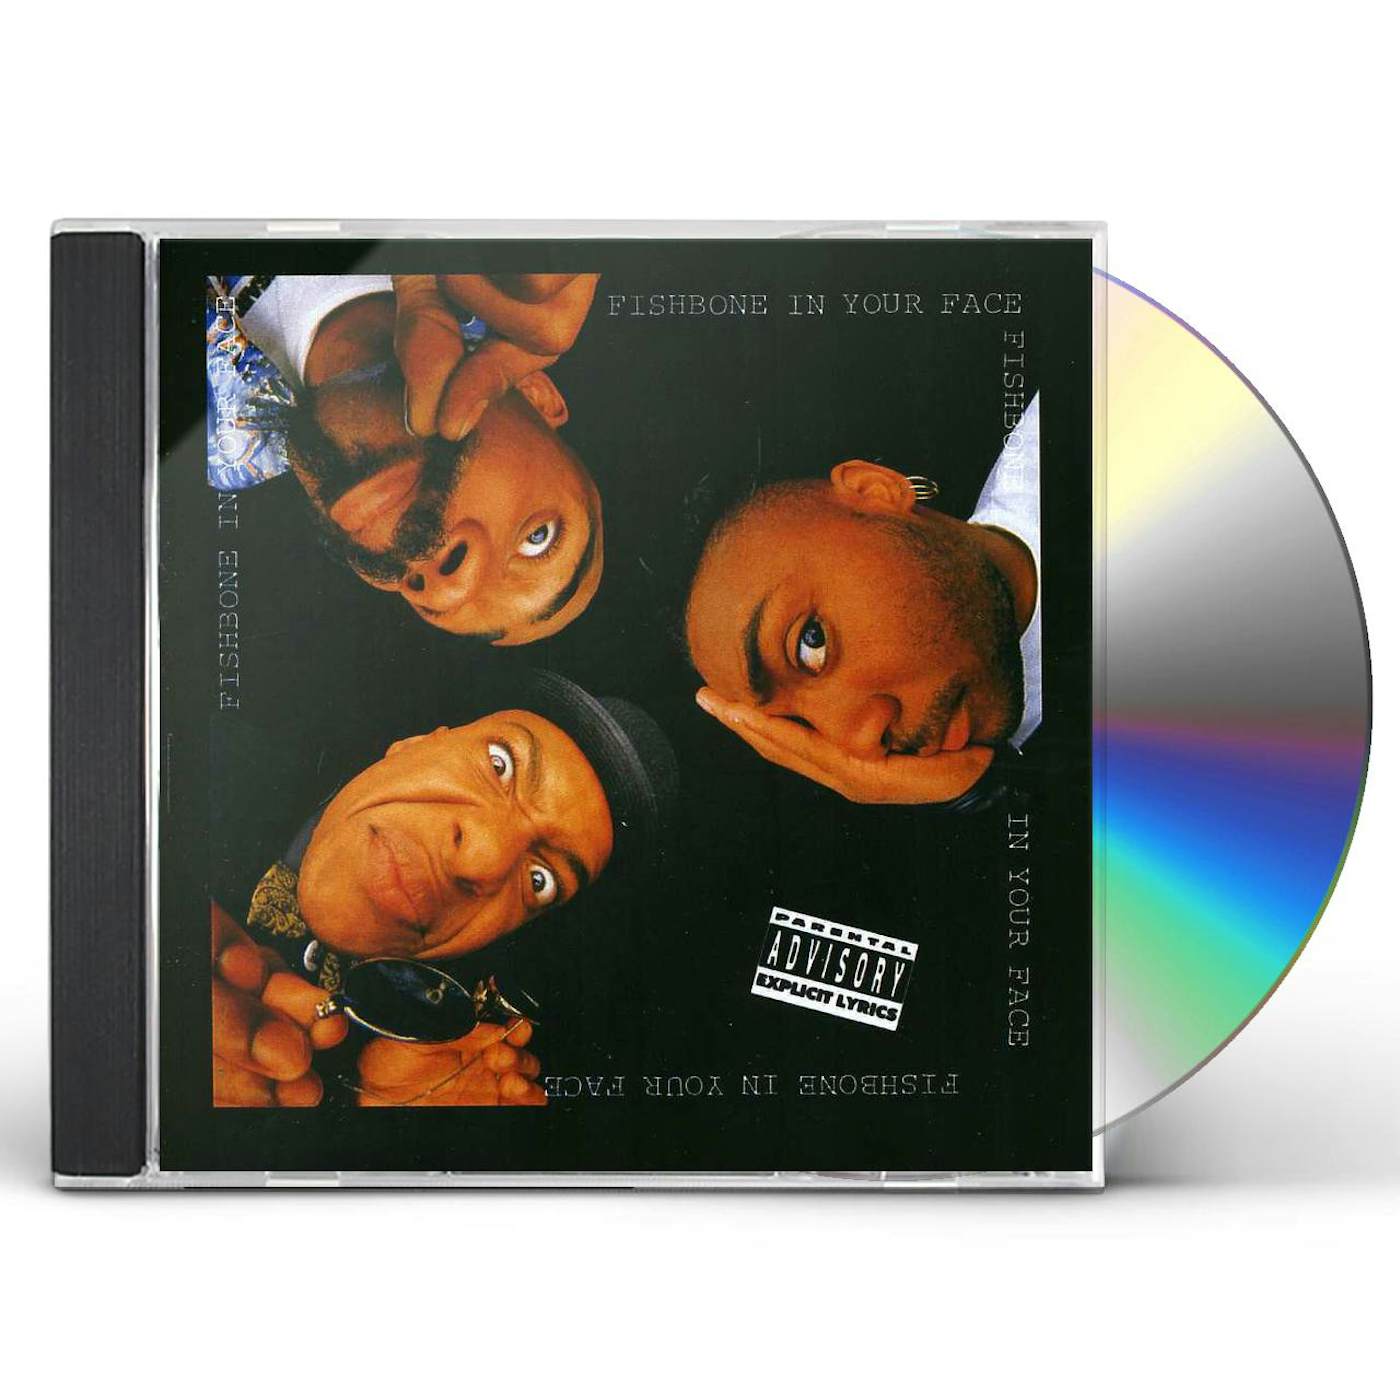 Fishbone IN YOUR FACE CD $15.99$14.49